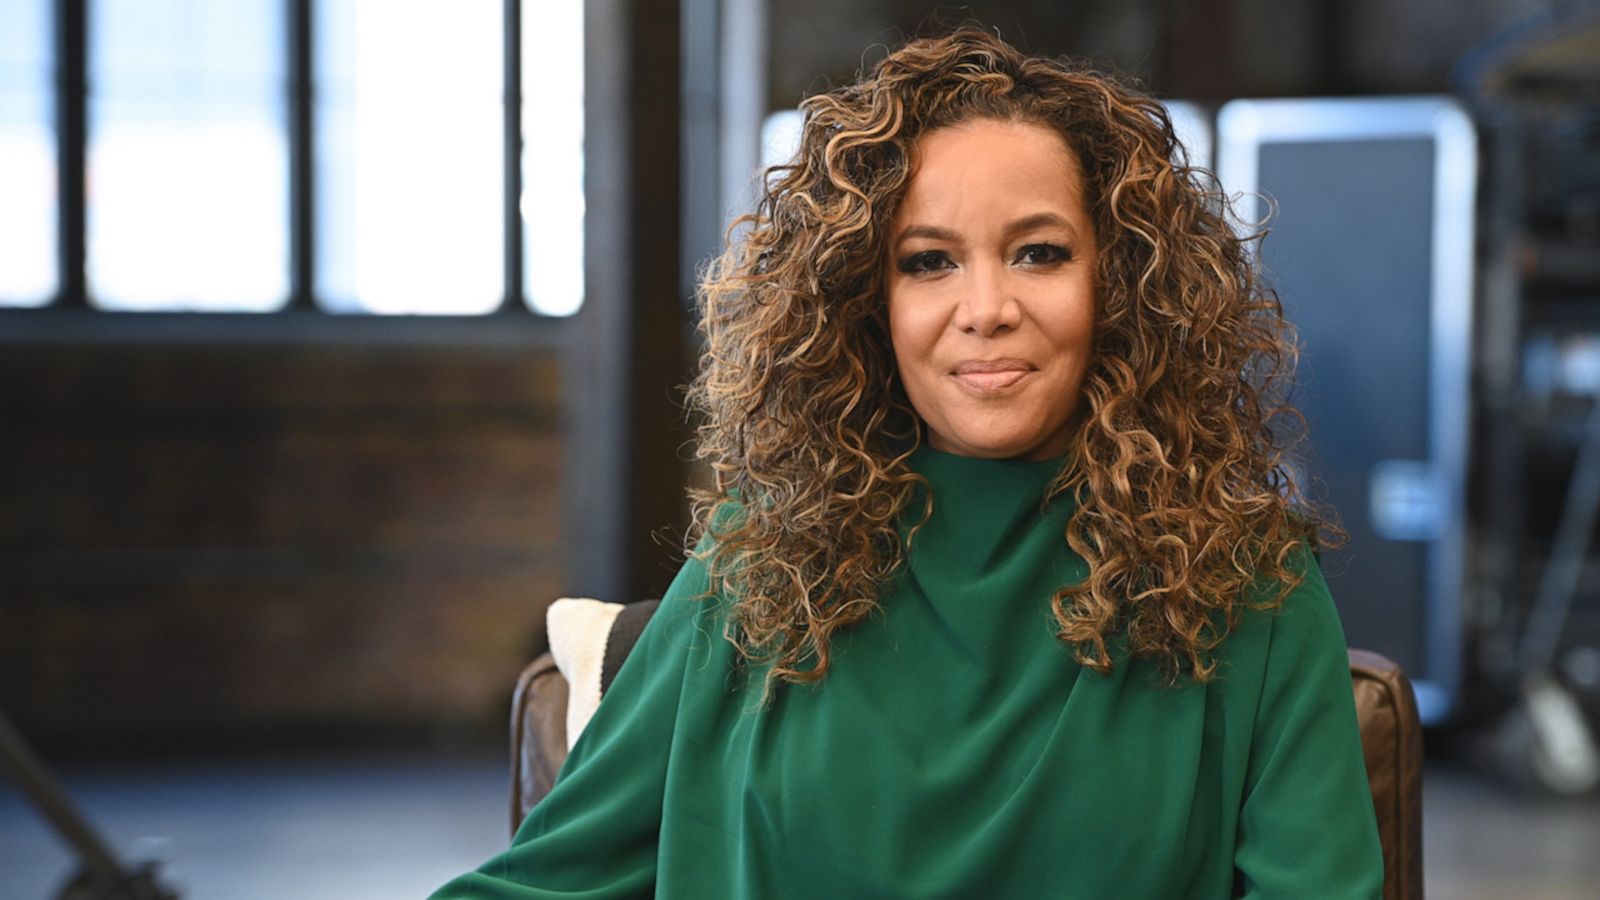 Our favorite Sunny Hostin moments for her birthday - Good Morning America